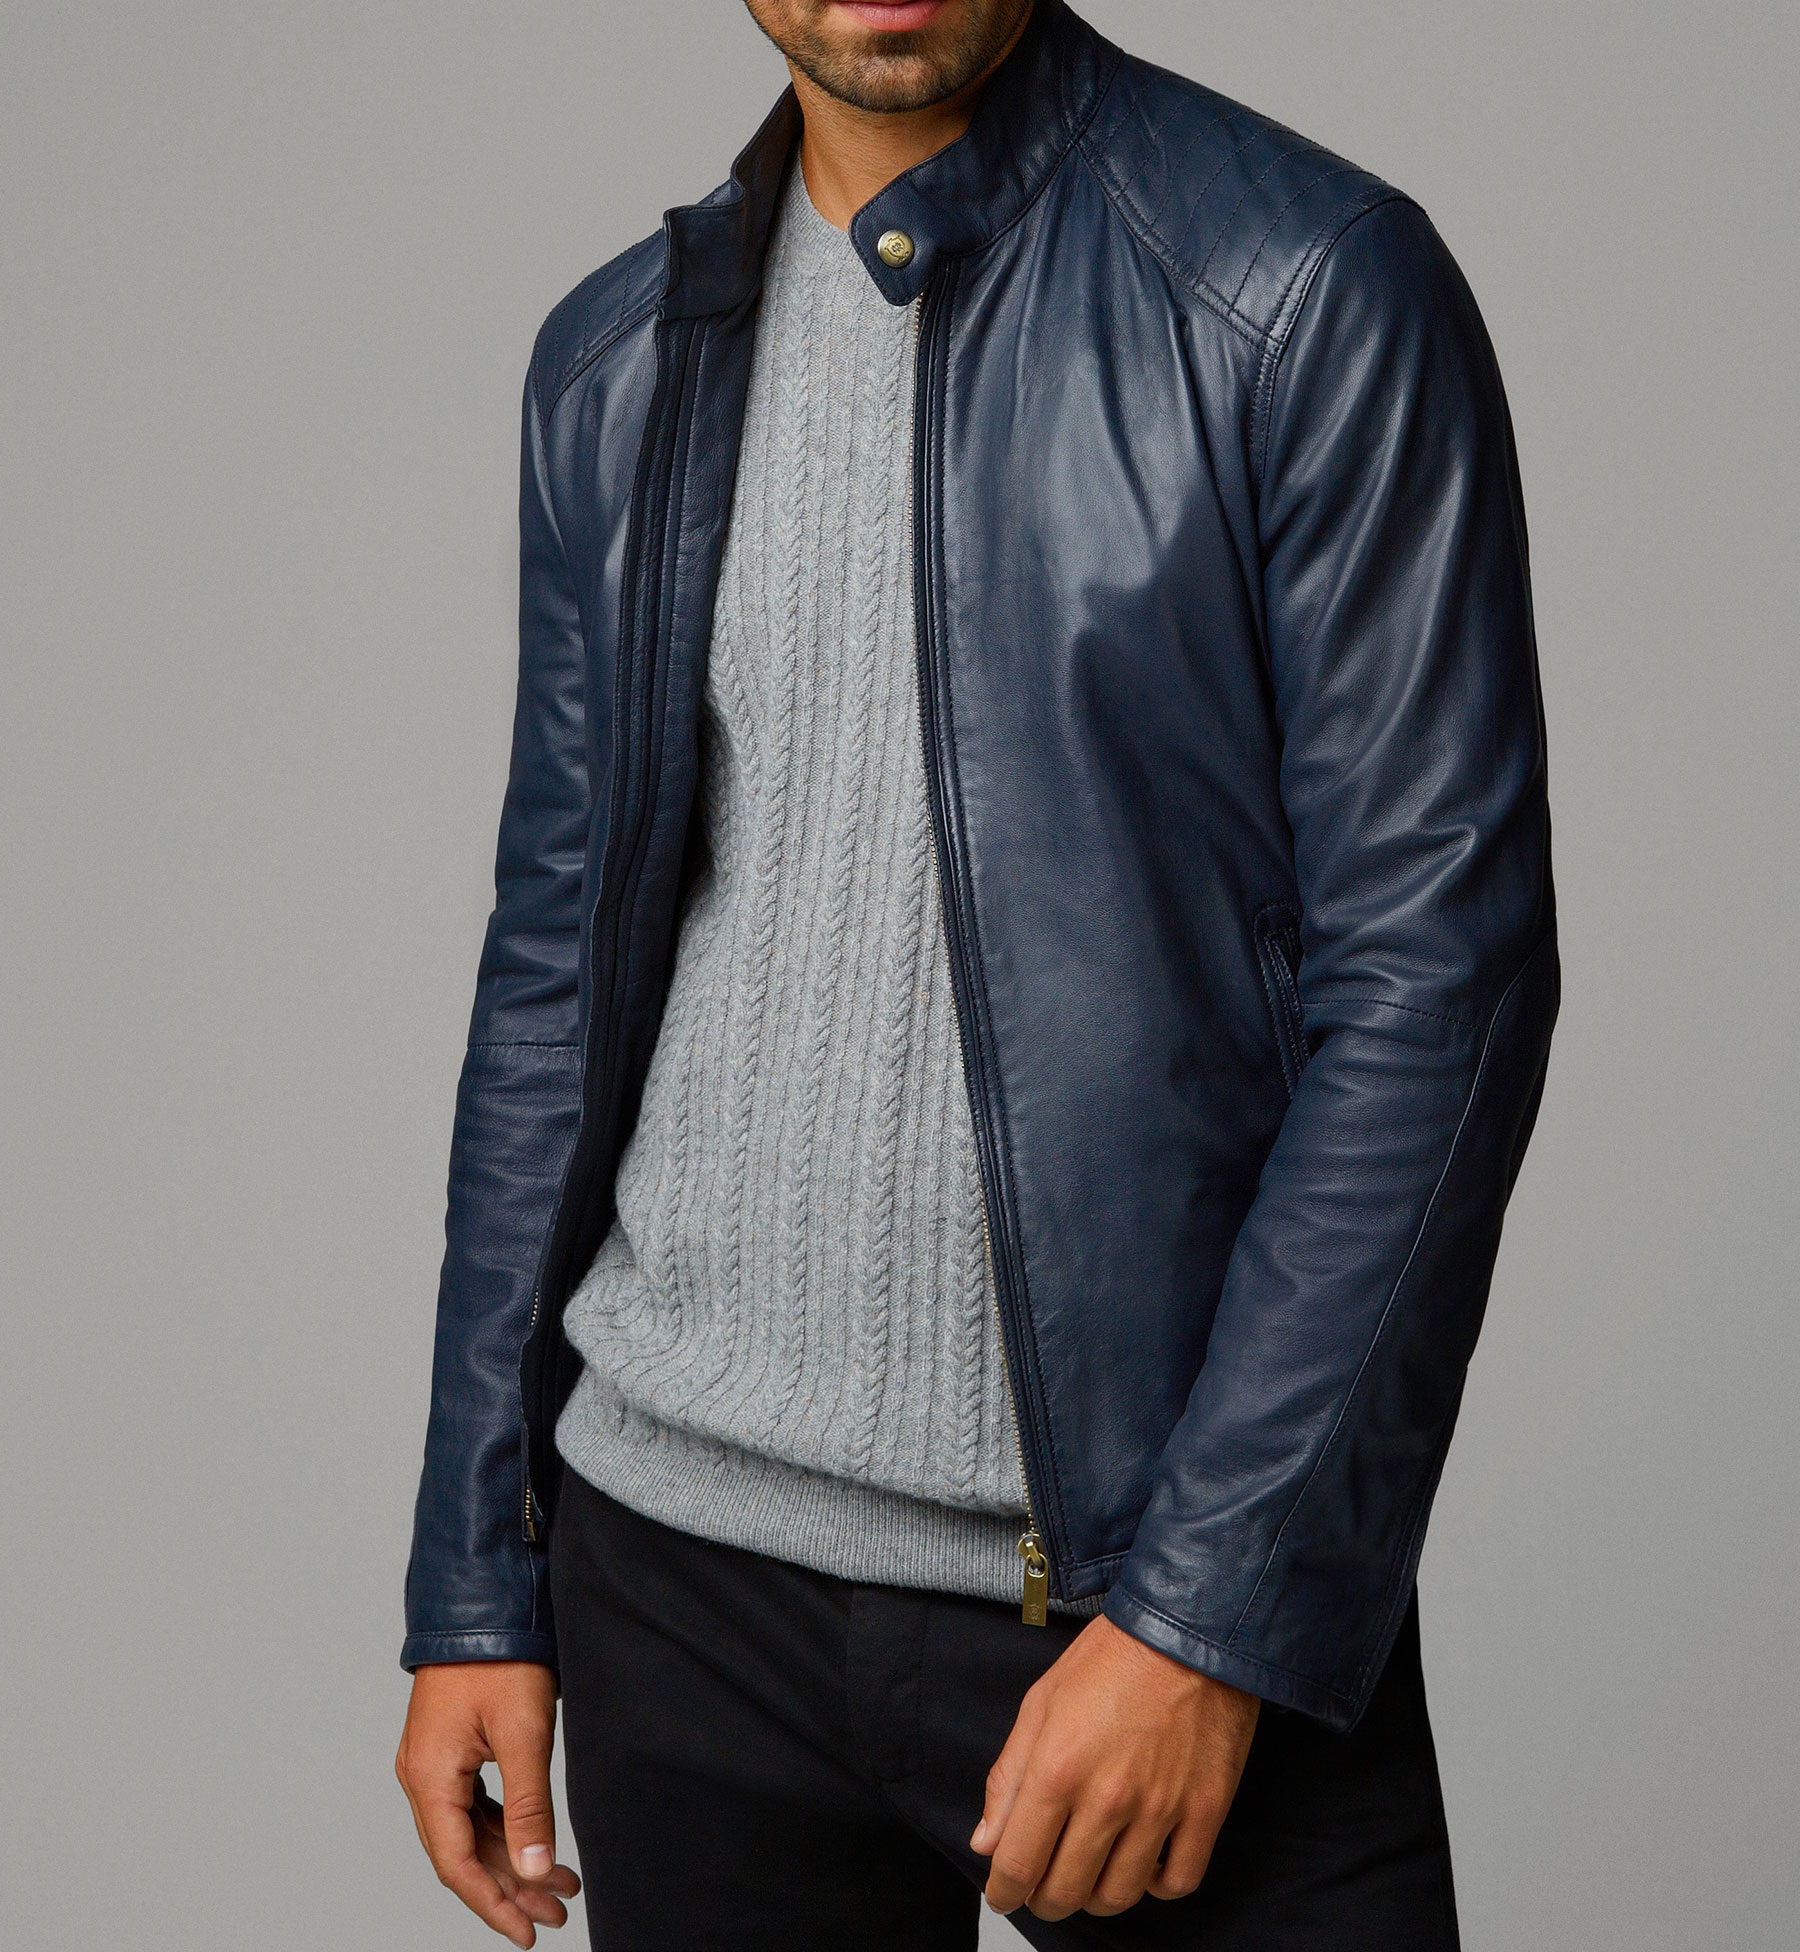 Mens Fashion Blue Leather Jacket, Mens Real Leather Jackets, Mens